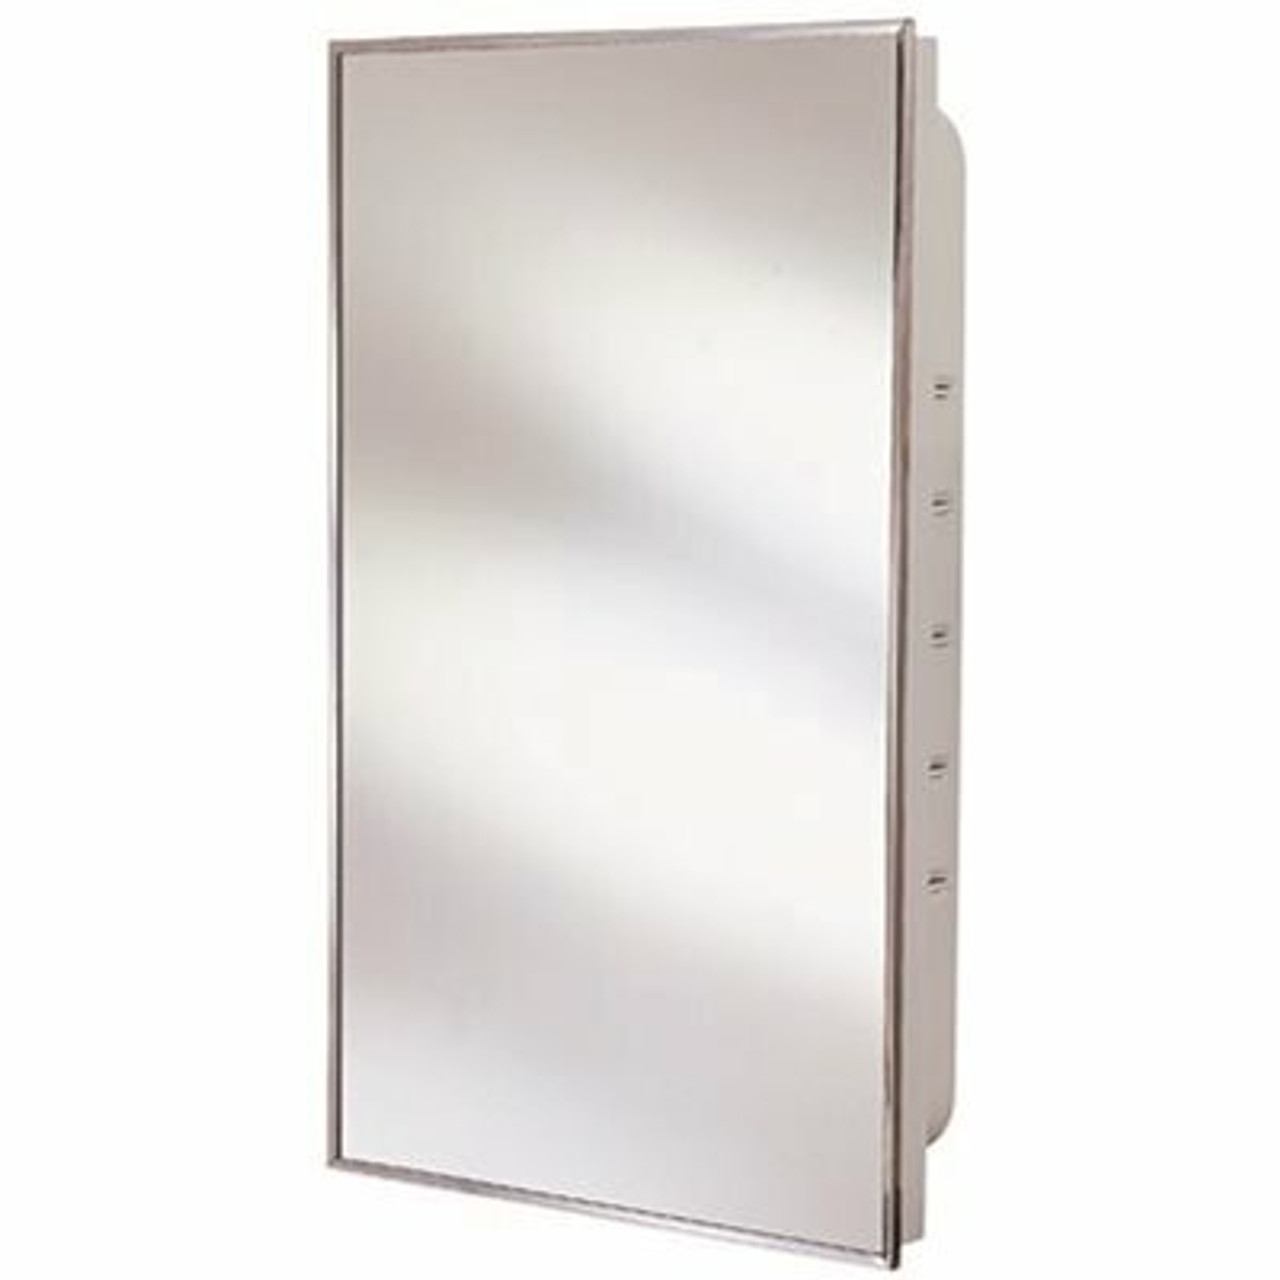 Proplus 16 In. X 26 In. Recessed Medicine Cabinet In Stainless Steel